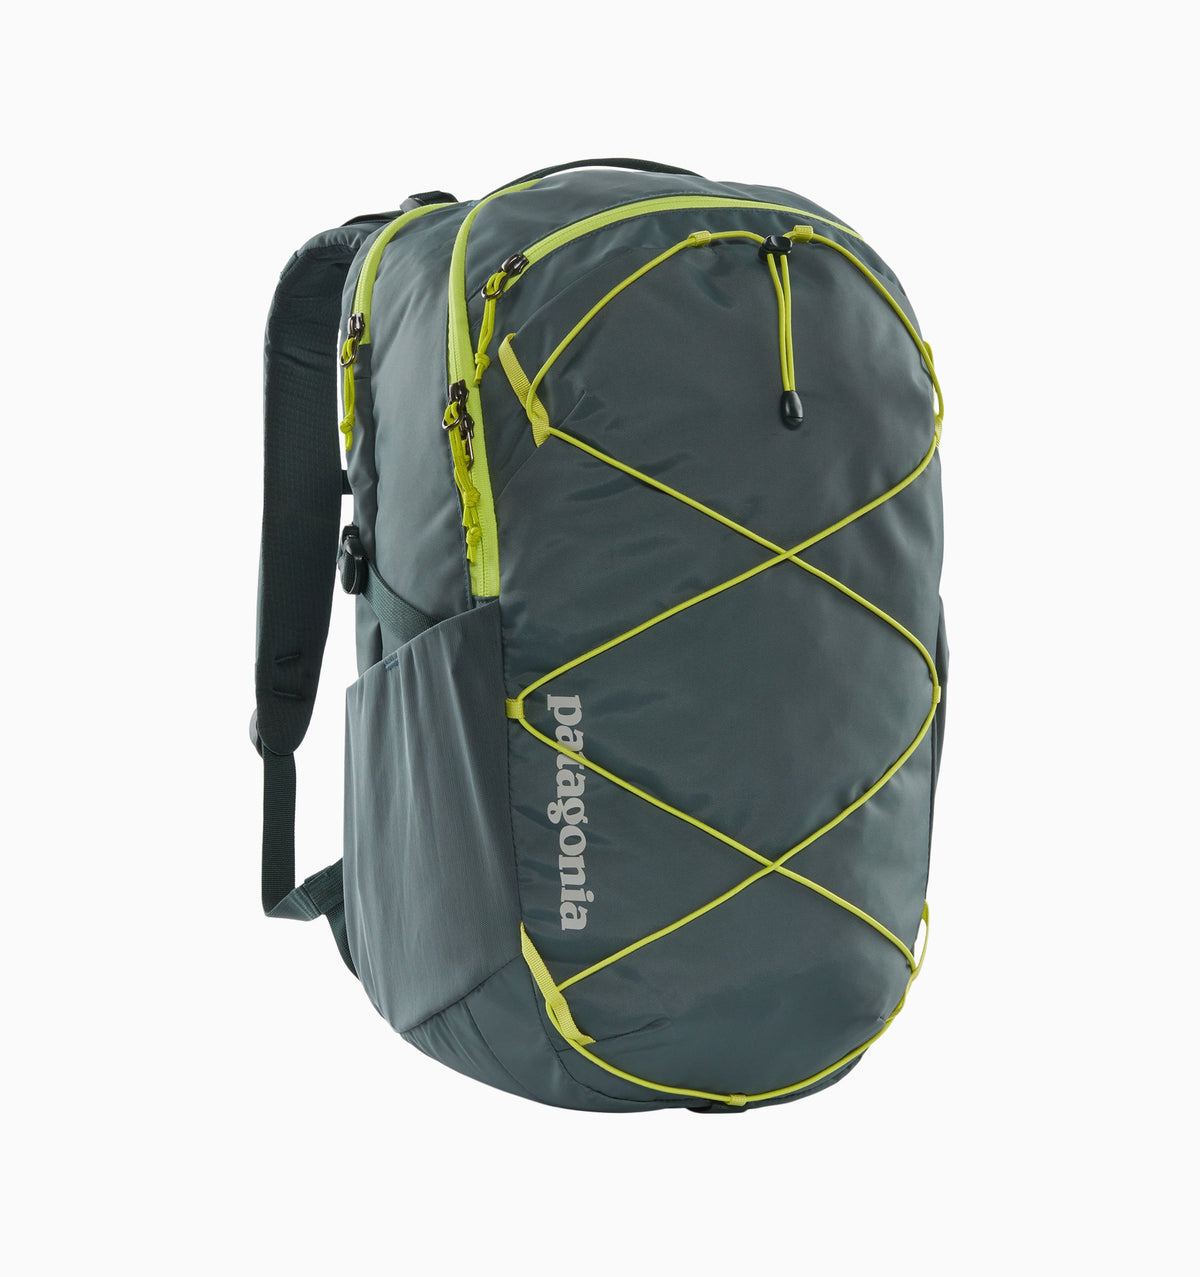 Patagonia 15 Refugio Day Pack 30L - Nouveau Green